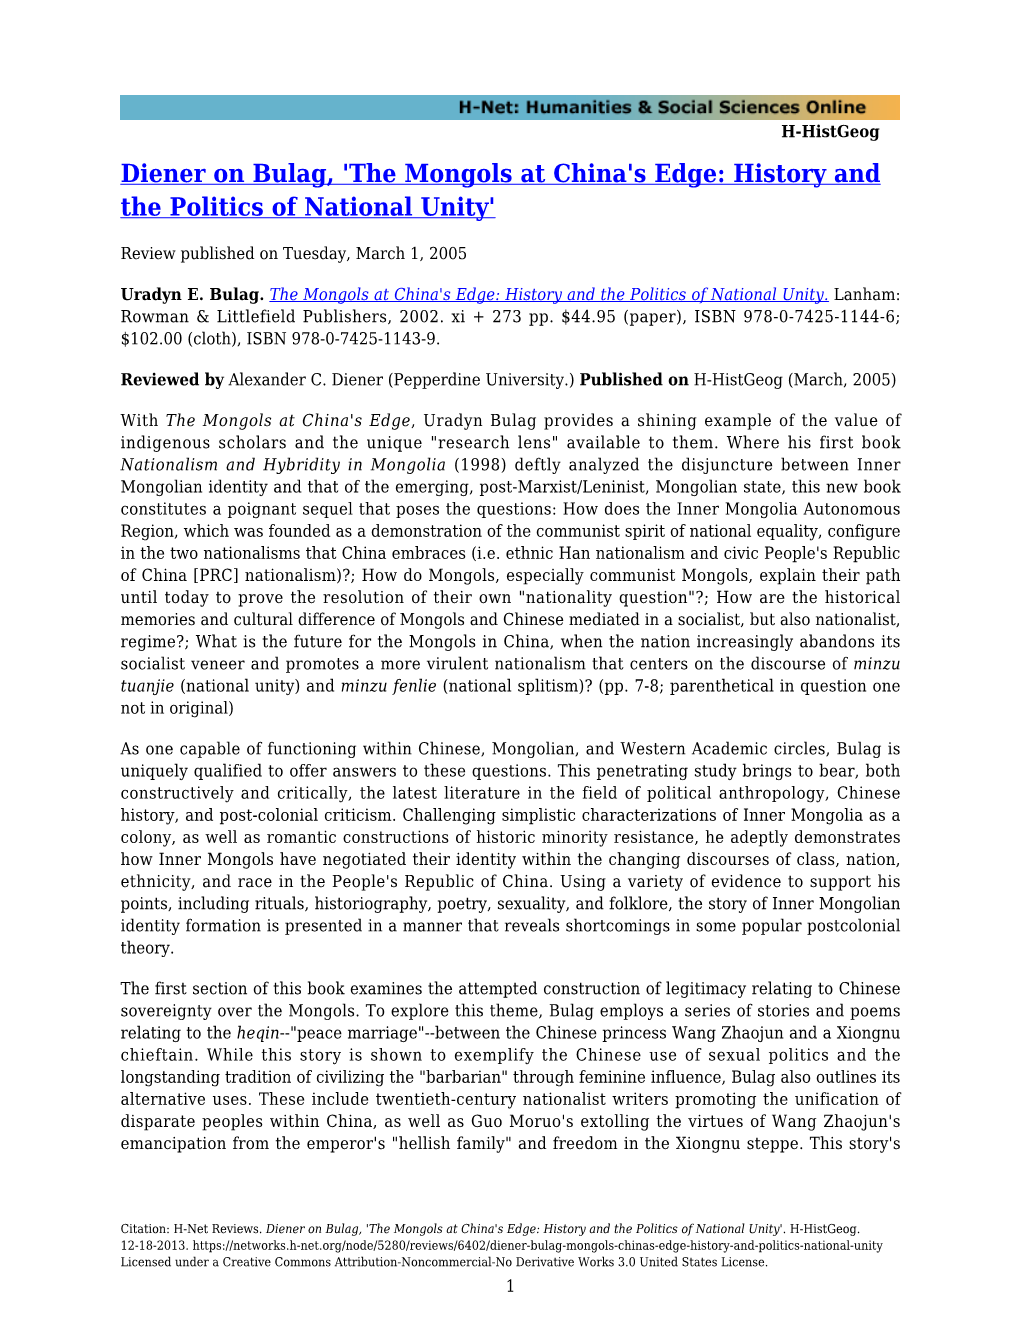 Diener on Bulag, 'The Mongols at China's Edge: History and the Politics of National Unity'